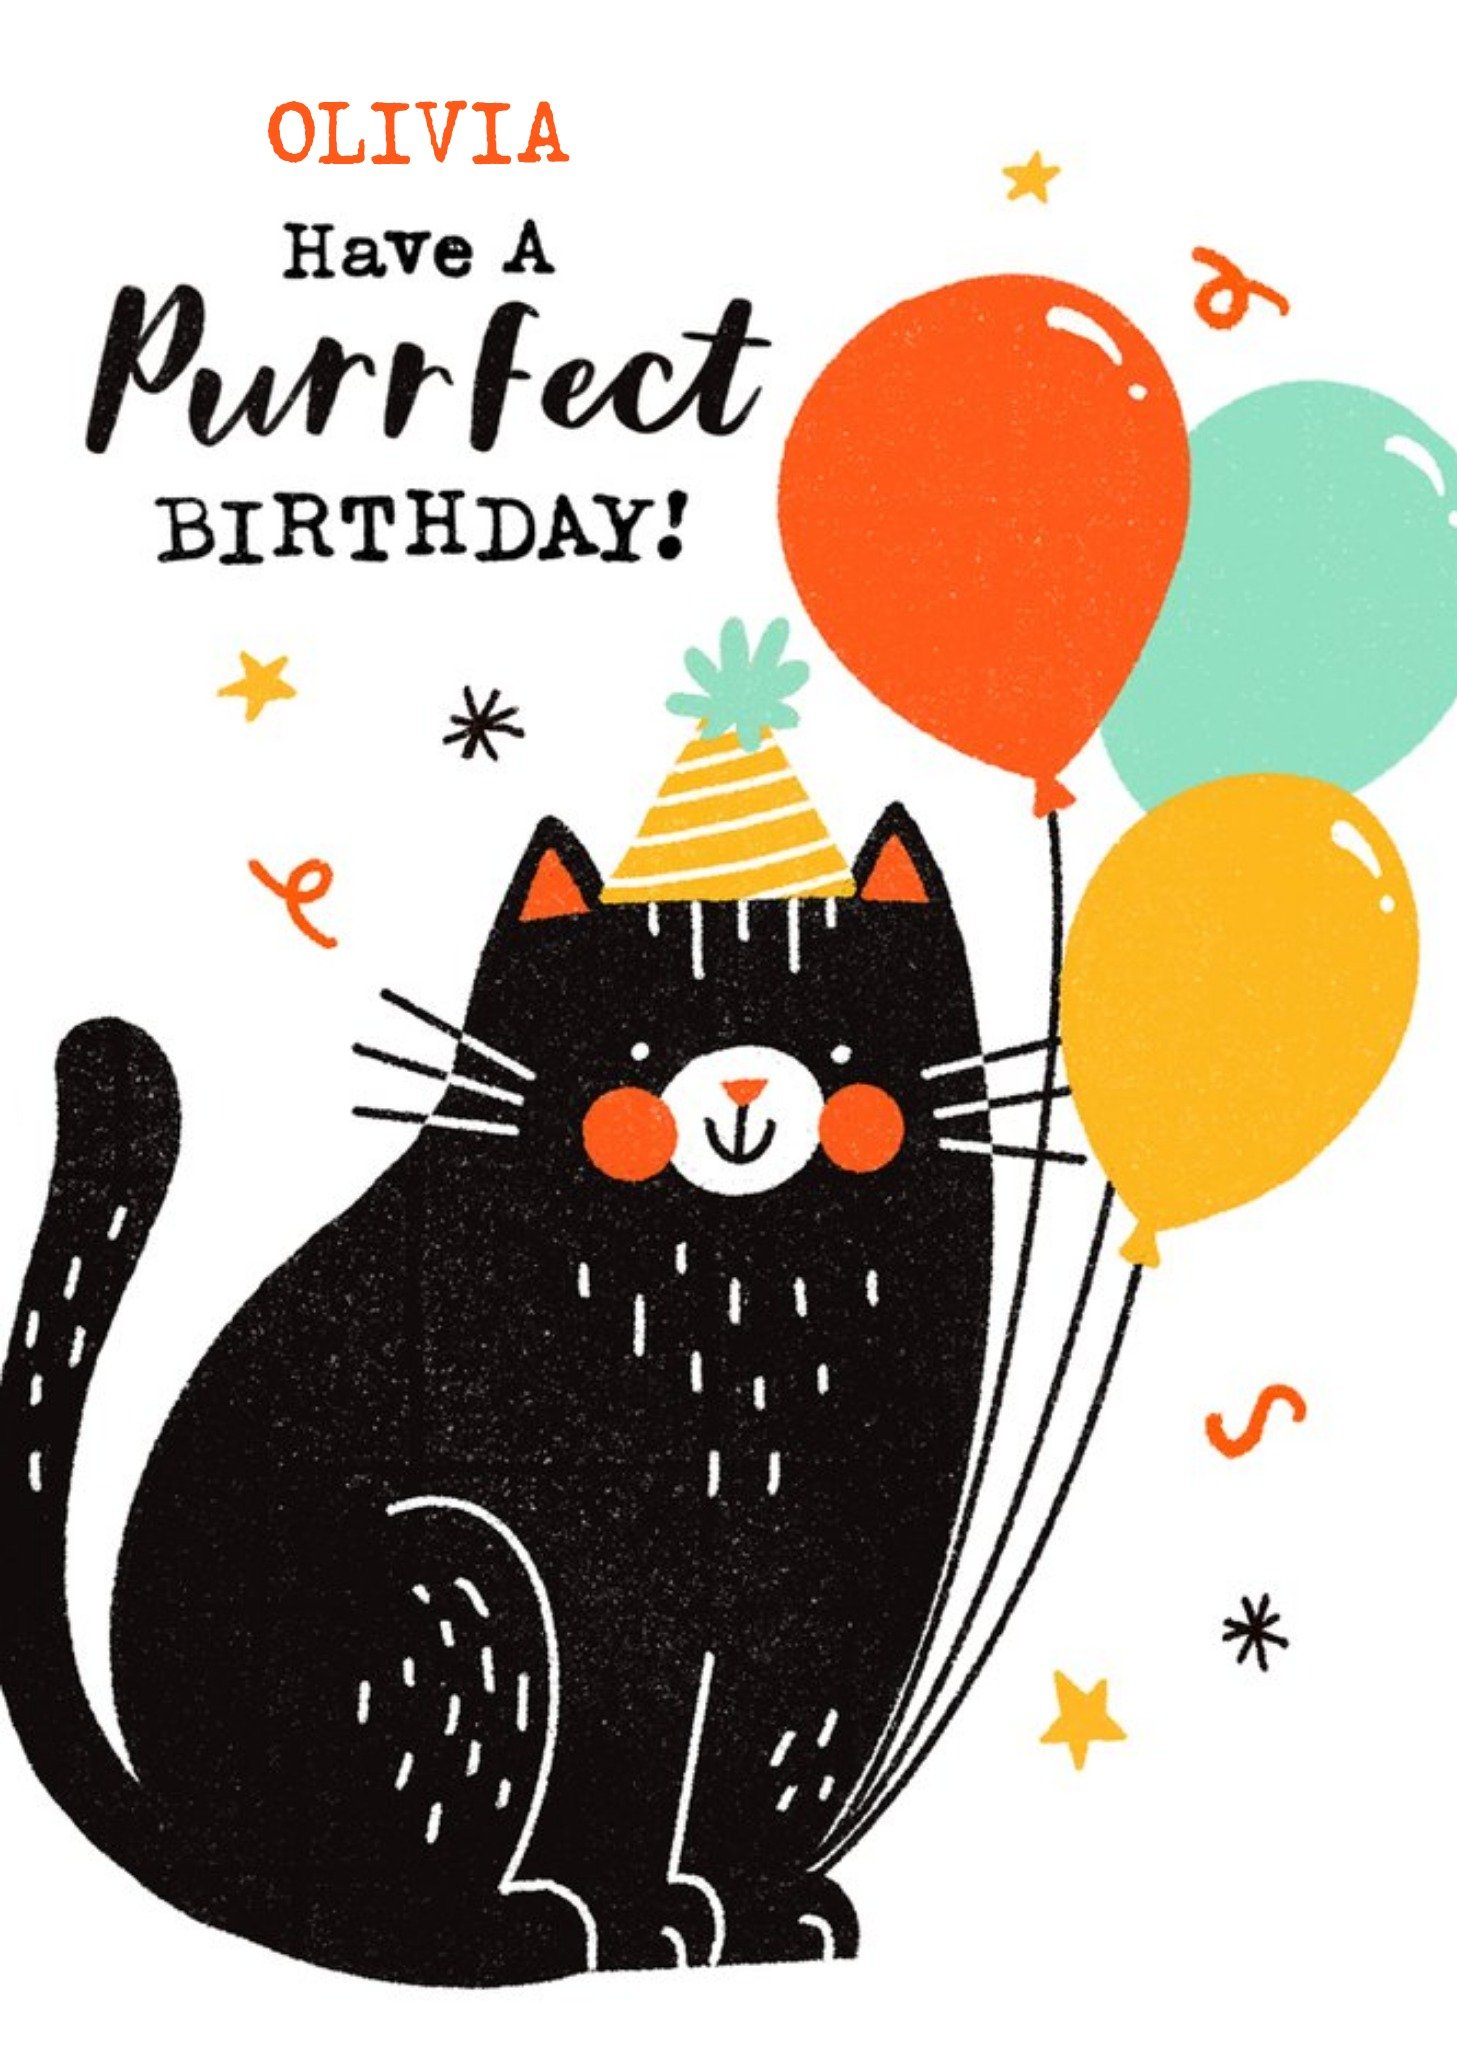 Moonpig Bright Illustration Of A Party Cat. Have A Purrfect Birthday Card, Large